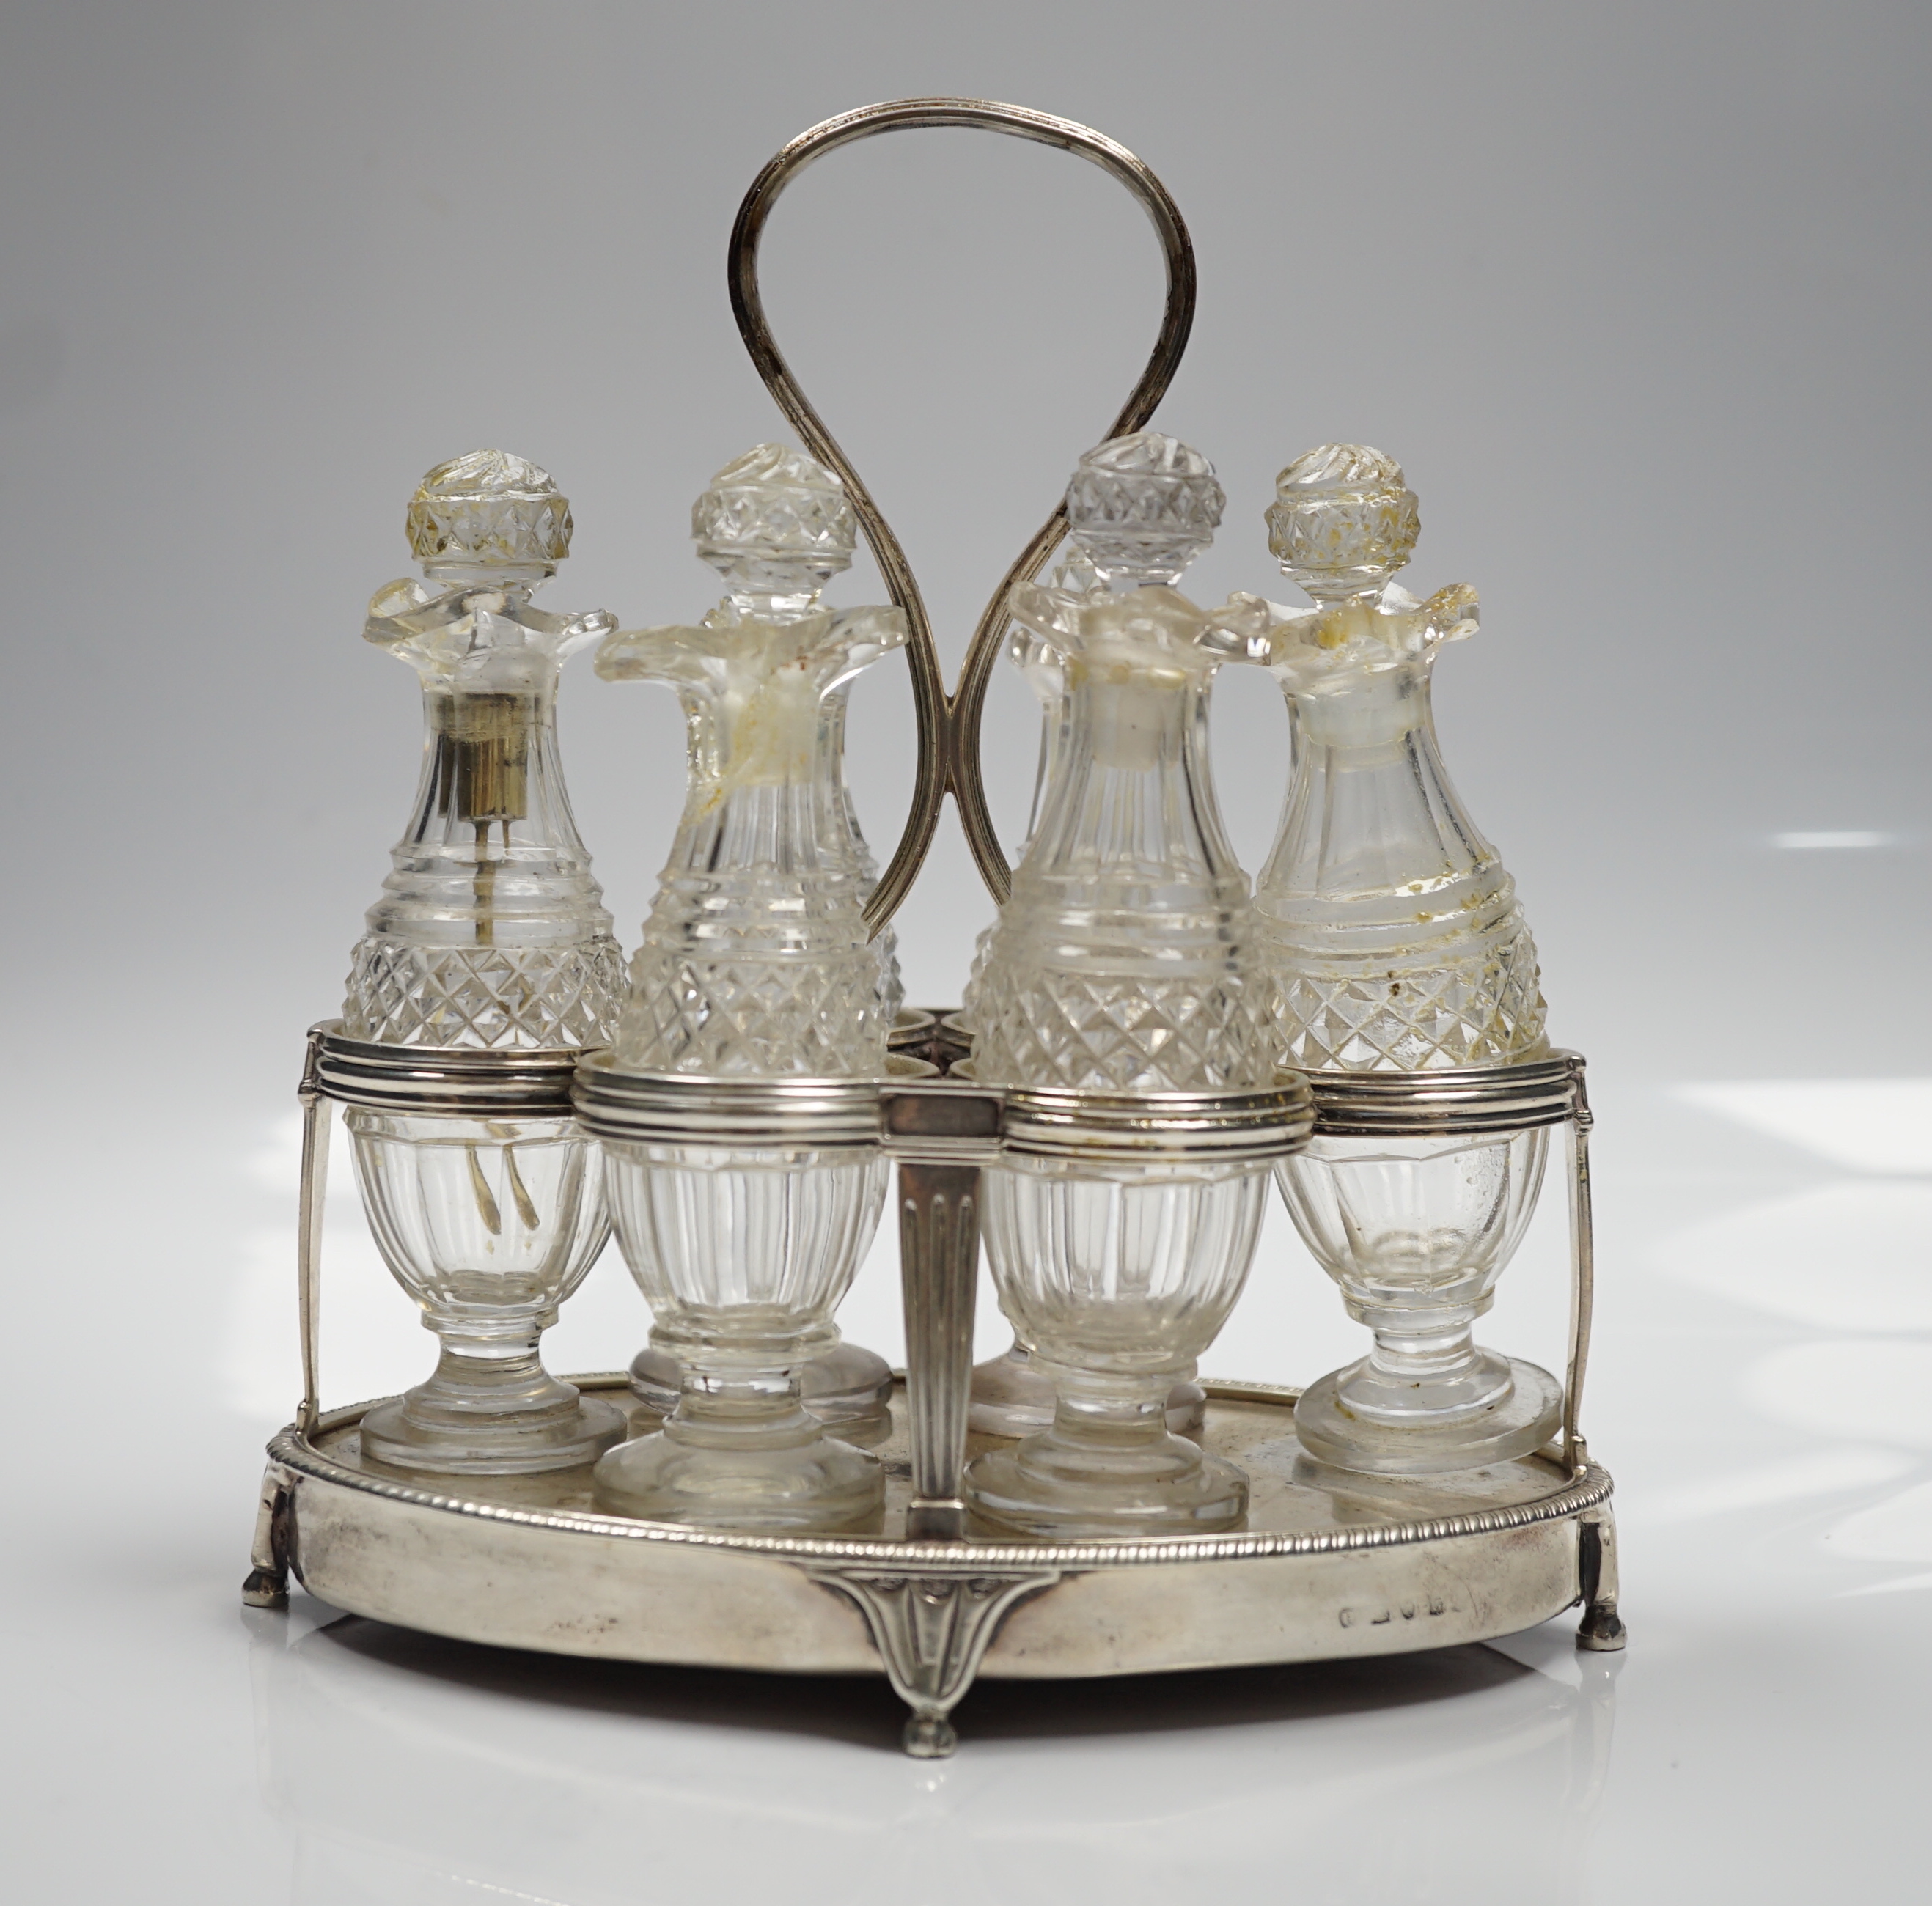 A George III silver mounted oval cruet stand, maker P?, London, 1802, with reeded ring handle and gadrooned border, with six cut glass bottles and stoppers (some damage), height 20cm.